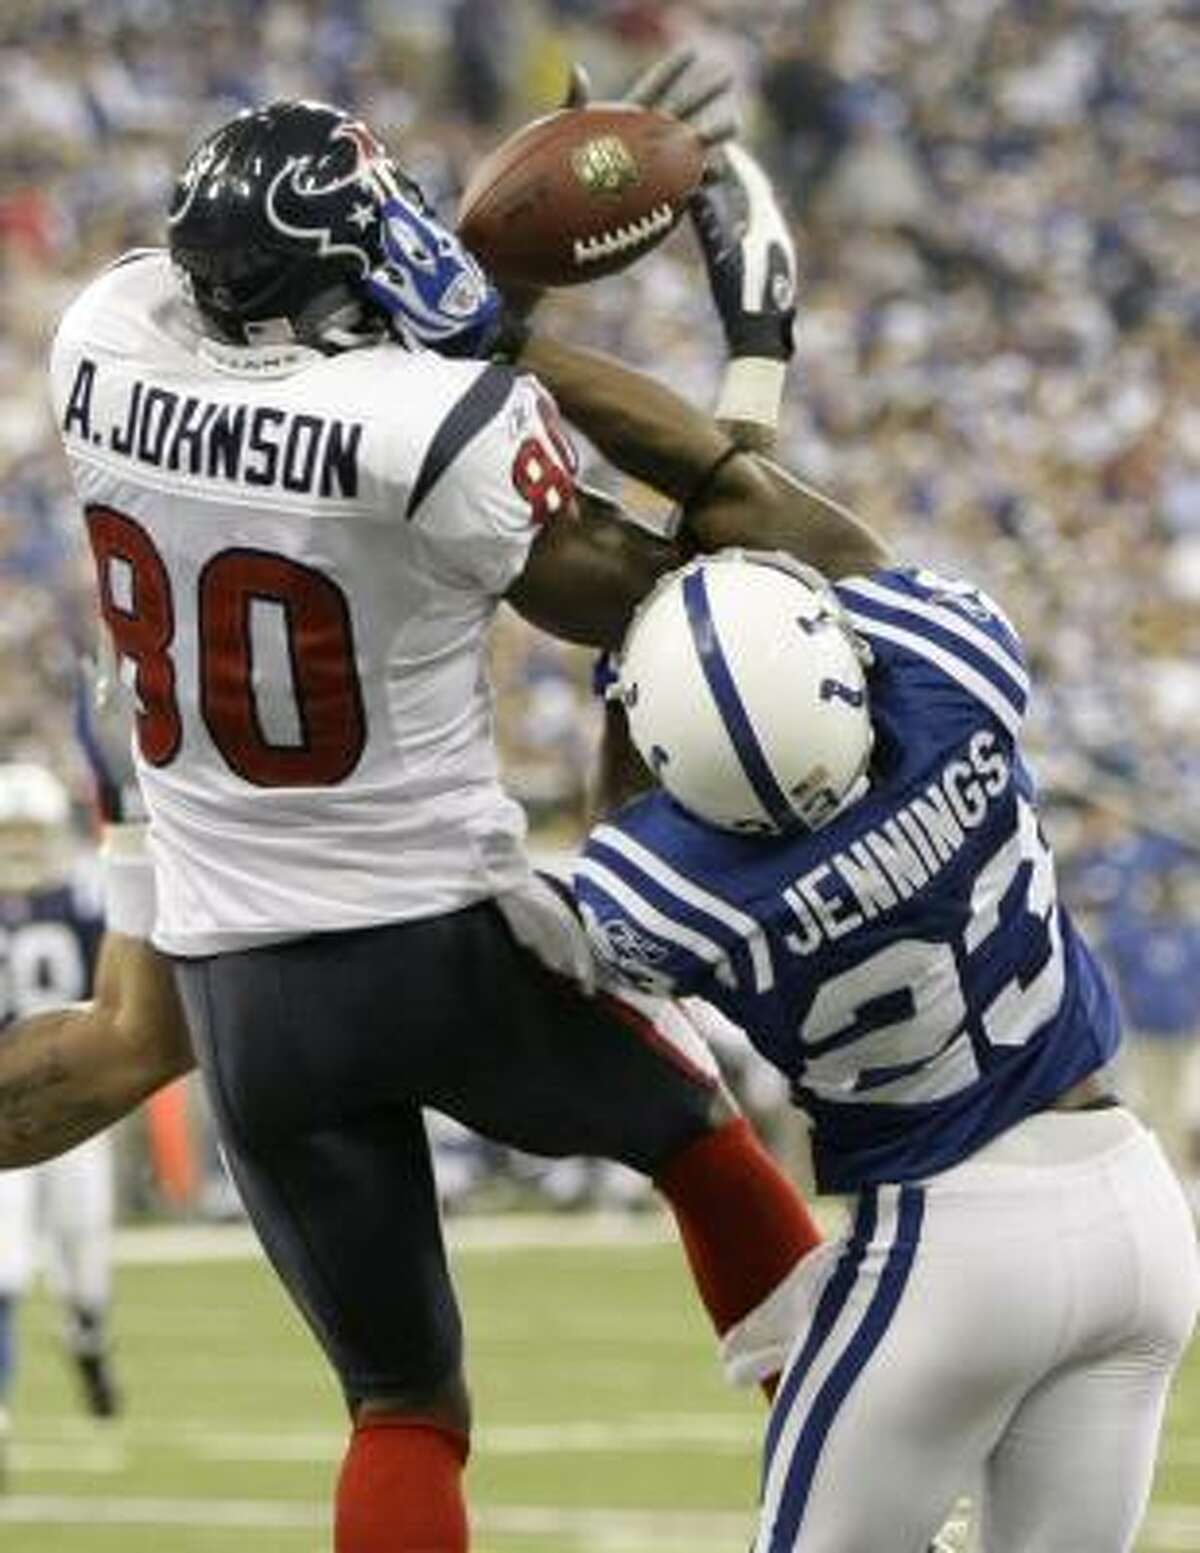 Andre Johnson, who had seven catches for 74 yards, can't haul in a long pass from Sage Rosenfels as Indianapolis' Tim Jennings (23) defends in the fourth quarter.